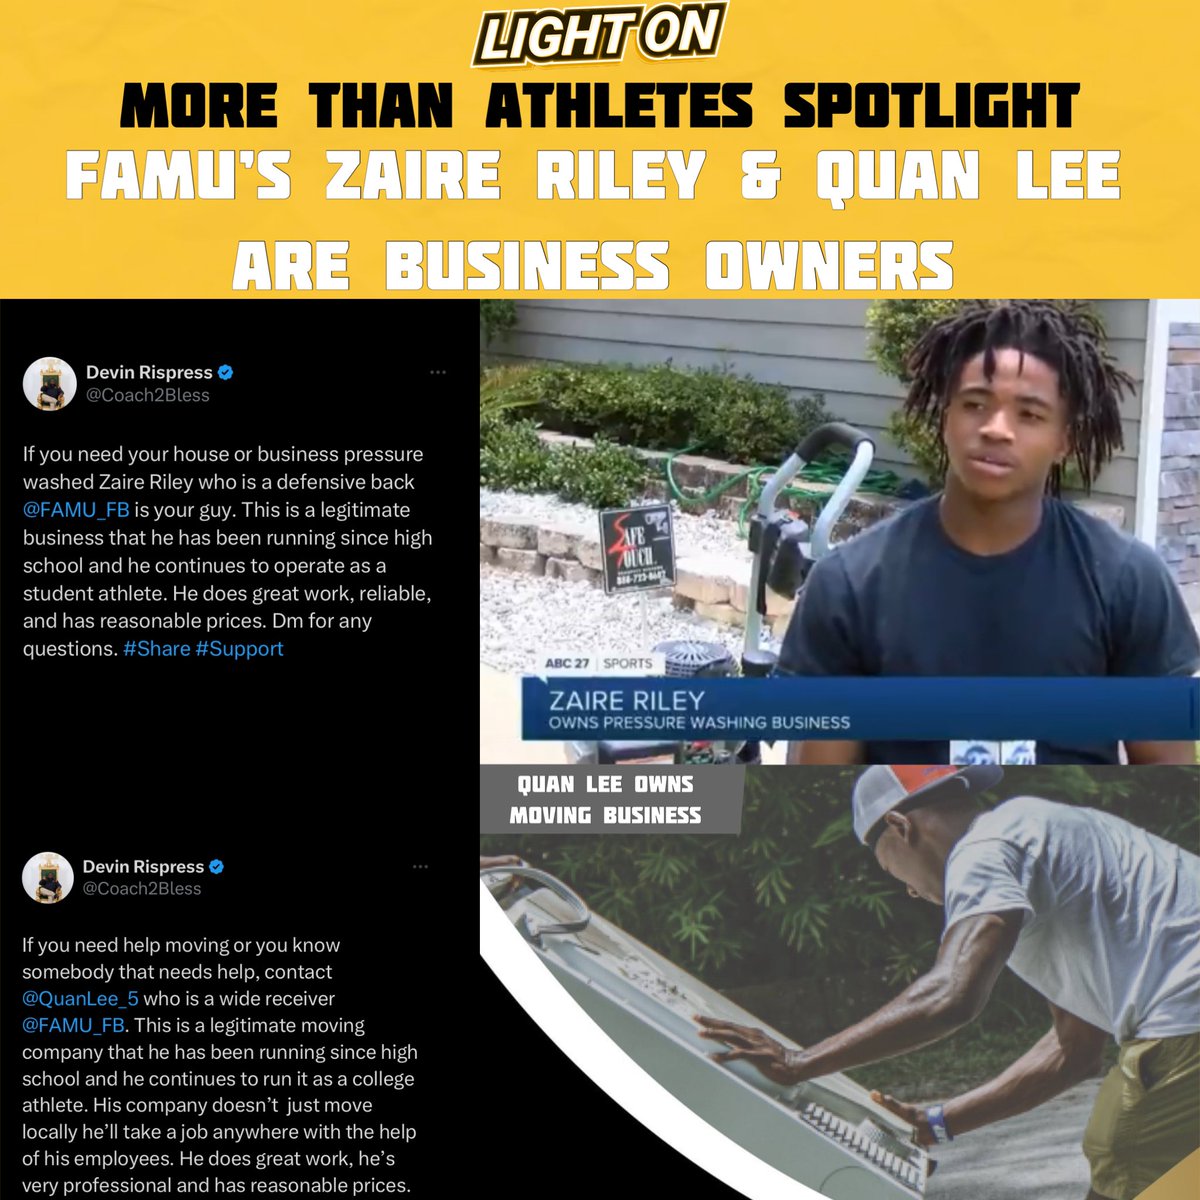 More Than Athletes Spotlight: FAMU’s Zaire Riley & Quan Lee are business owners. 🔥 • Zaire Riley owns a pressure washing business. • Quan Lee owns a moving business. 📸: @abc27 @QuanLee_5 @RileyZaire H/T: @Coach2Bless